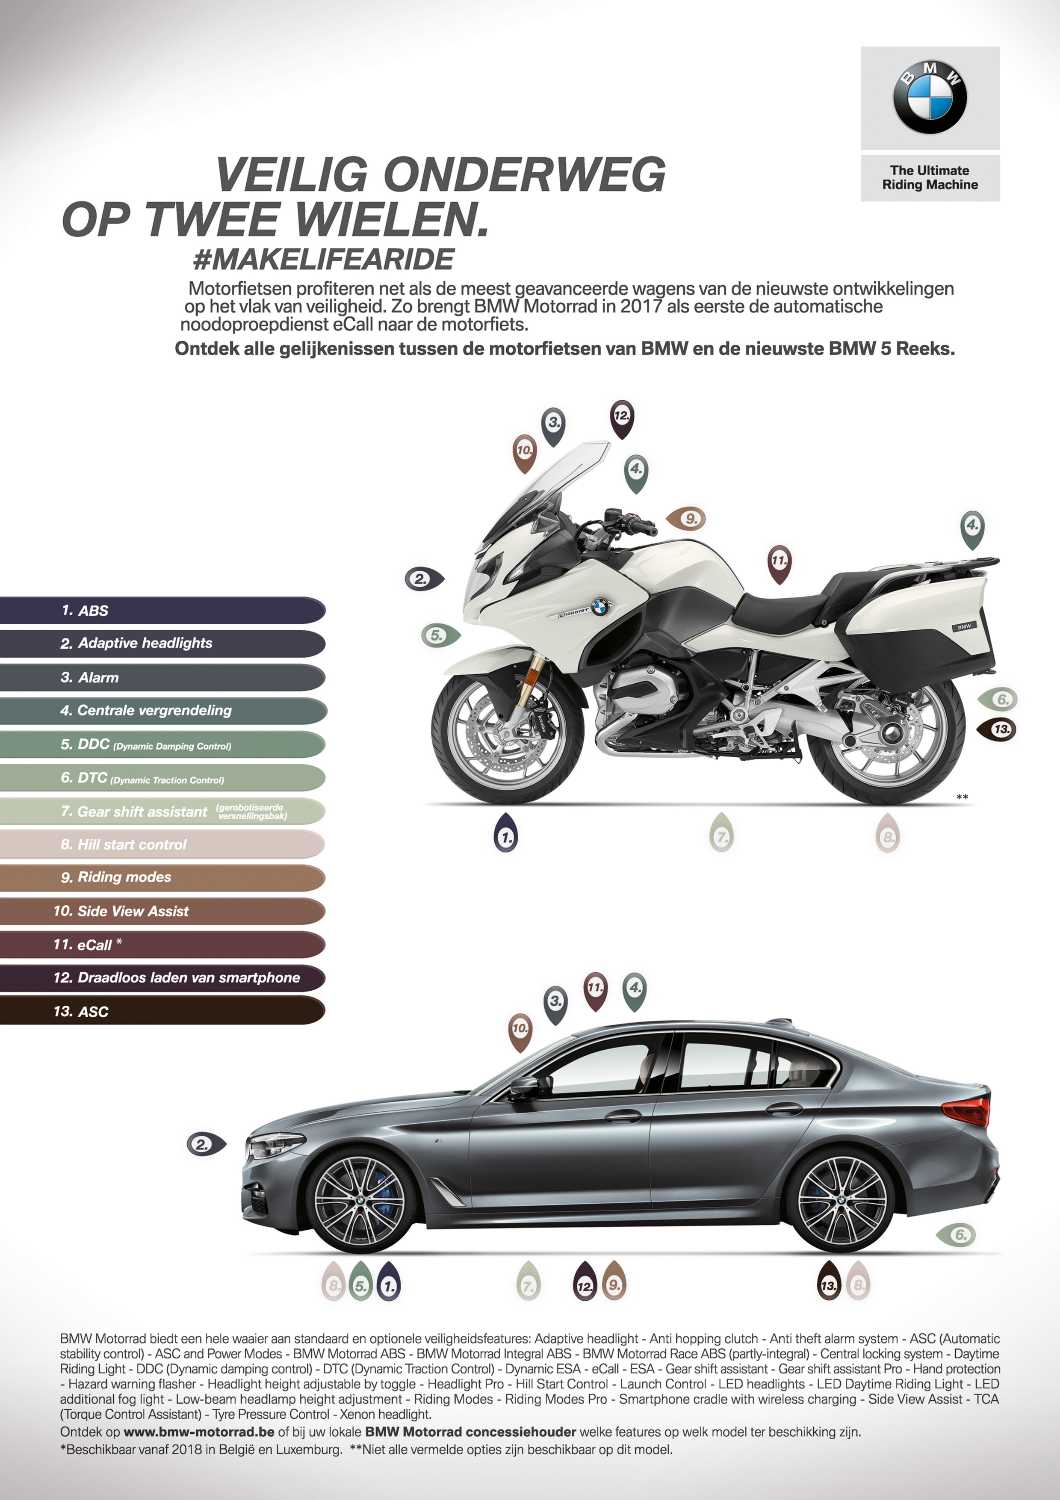 BMW Motorrad innovates with safety features on its new motorcycles (12/2016)